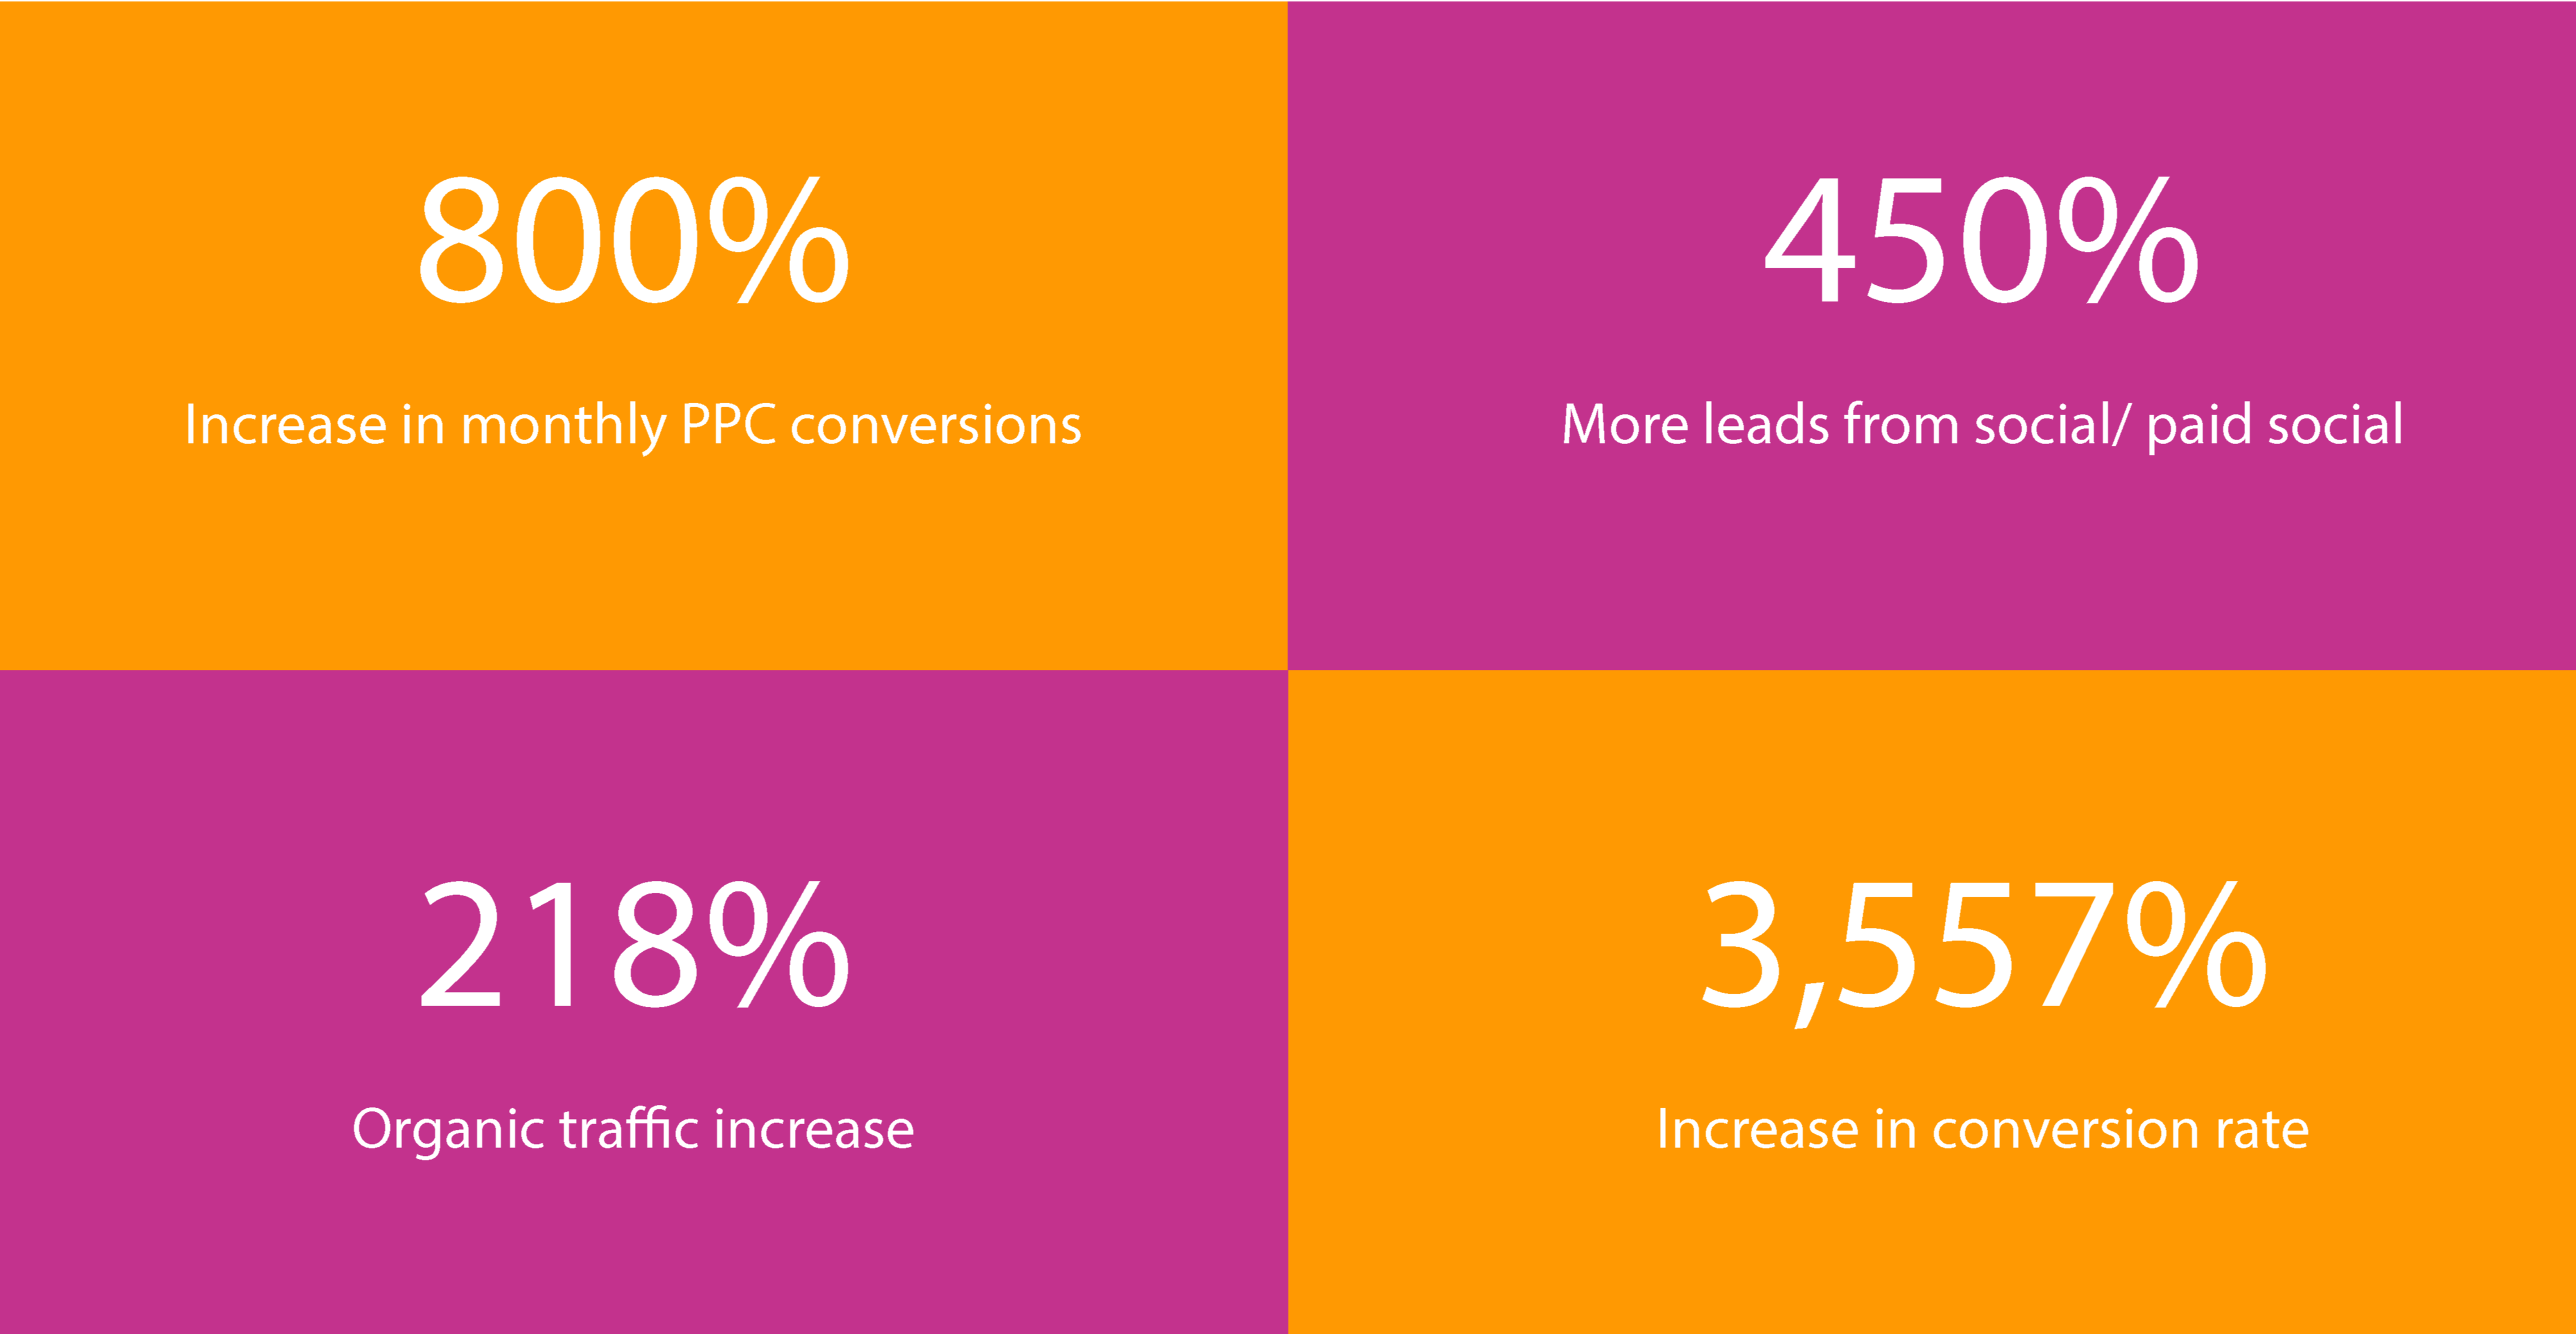 800% increase in ppc conversions